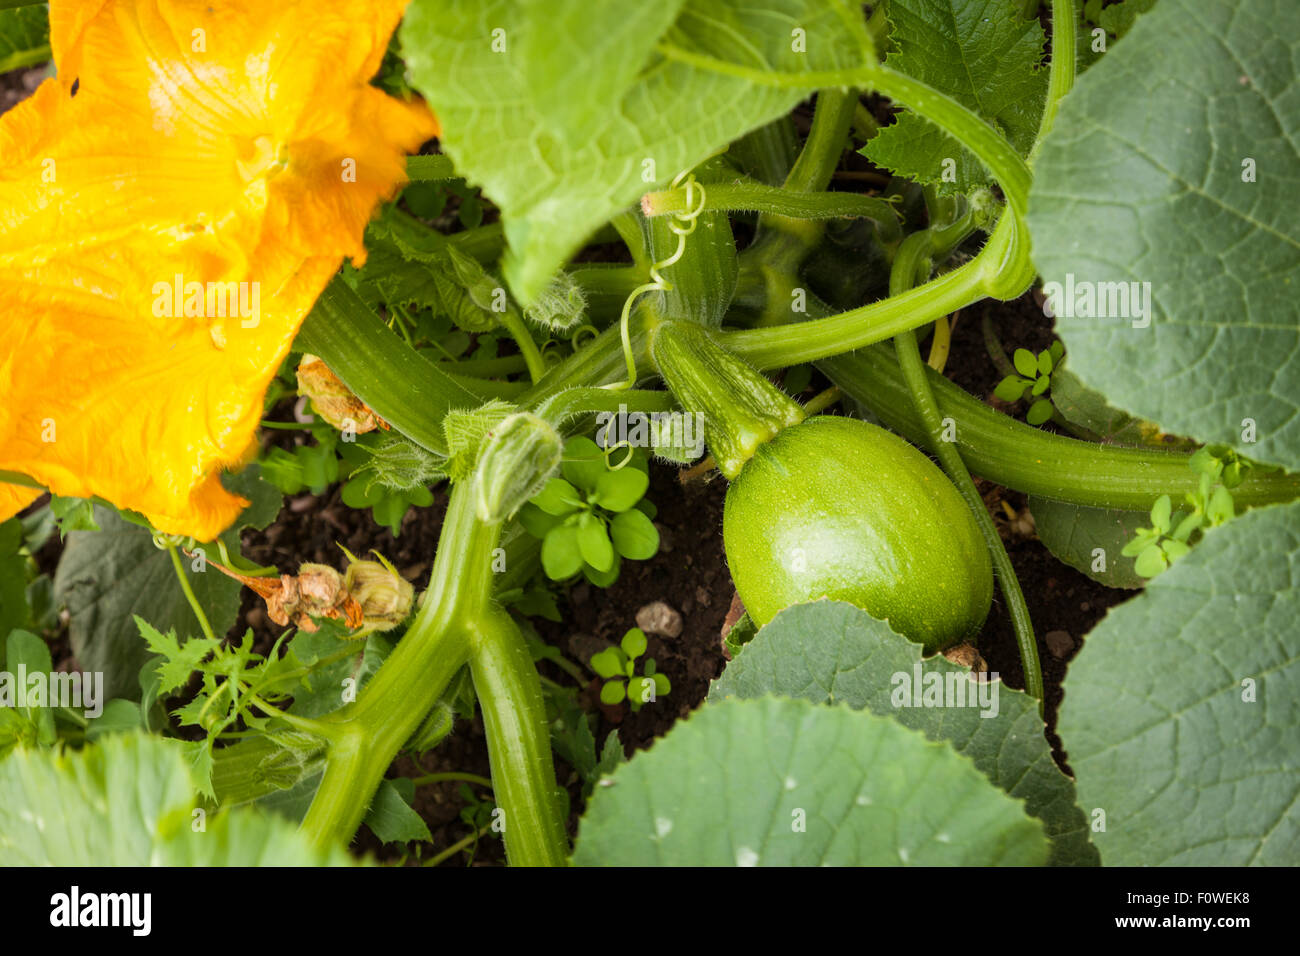 Marrow plant showing flower and fruit growing and leaves Stock Photo